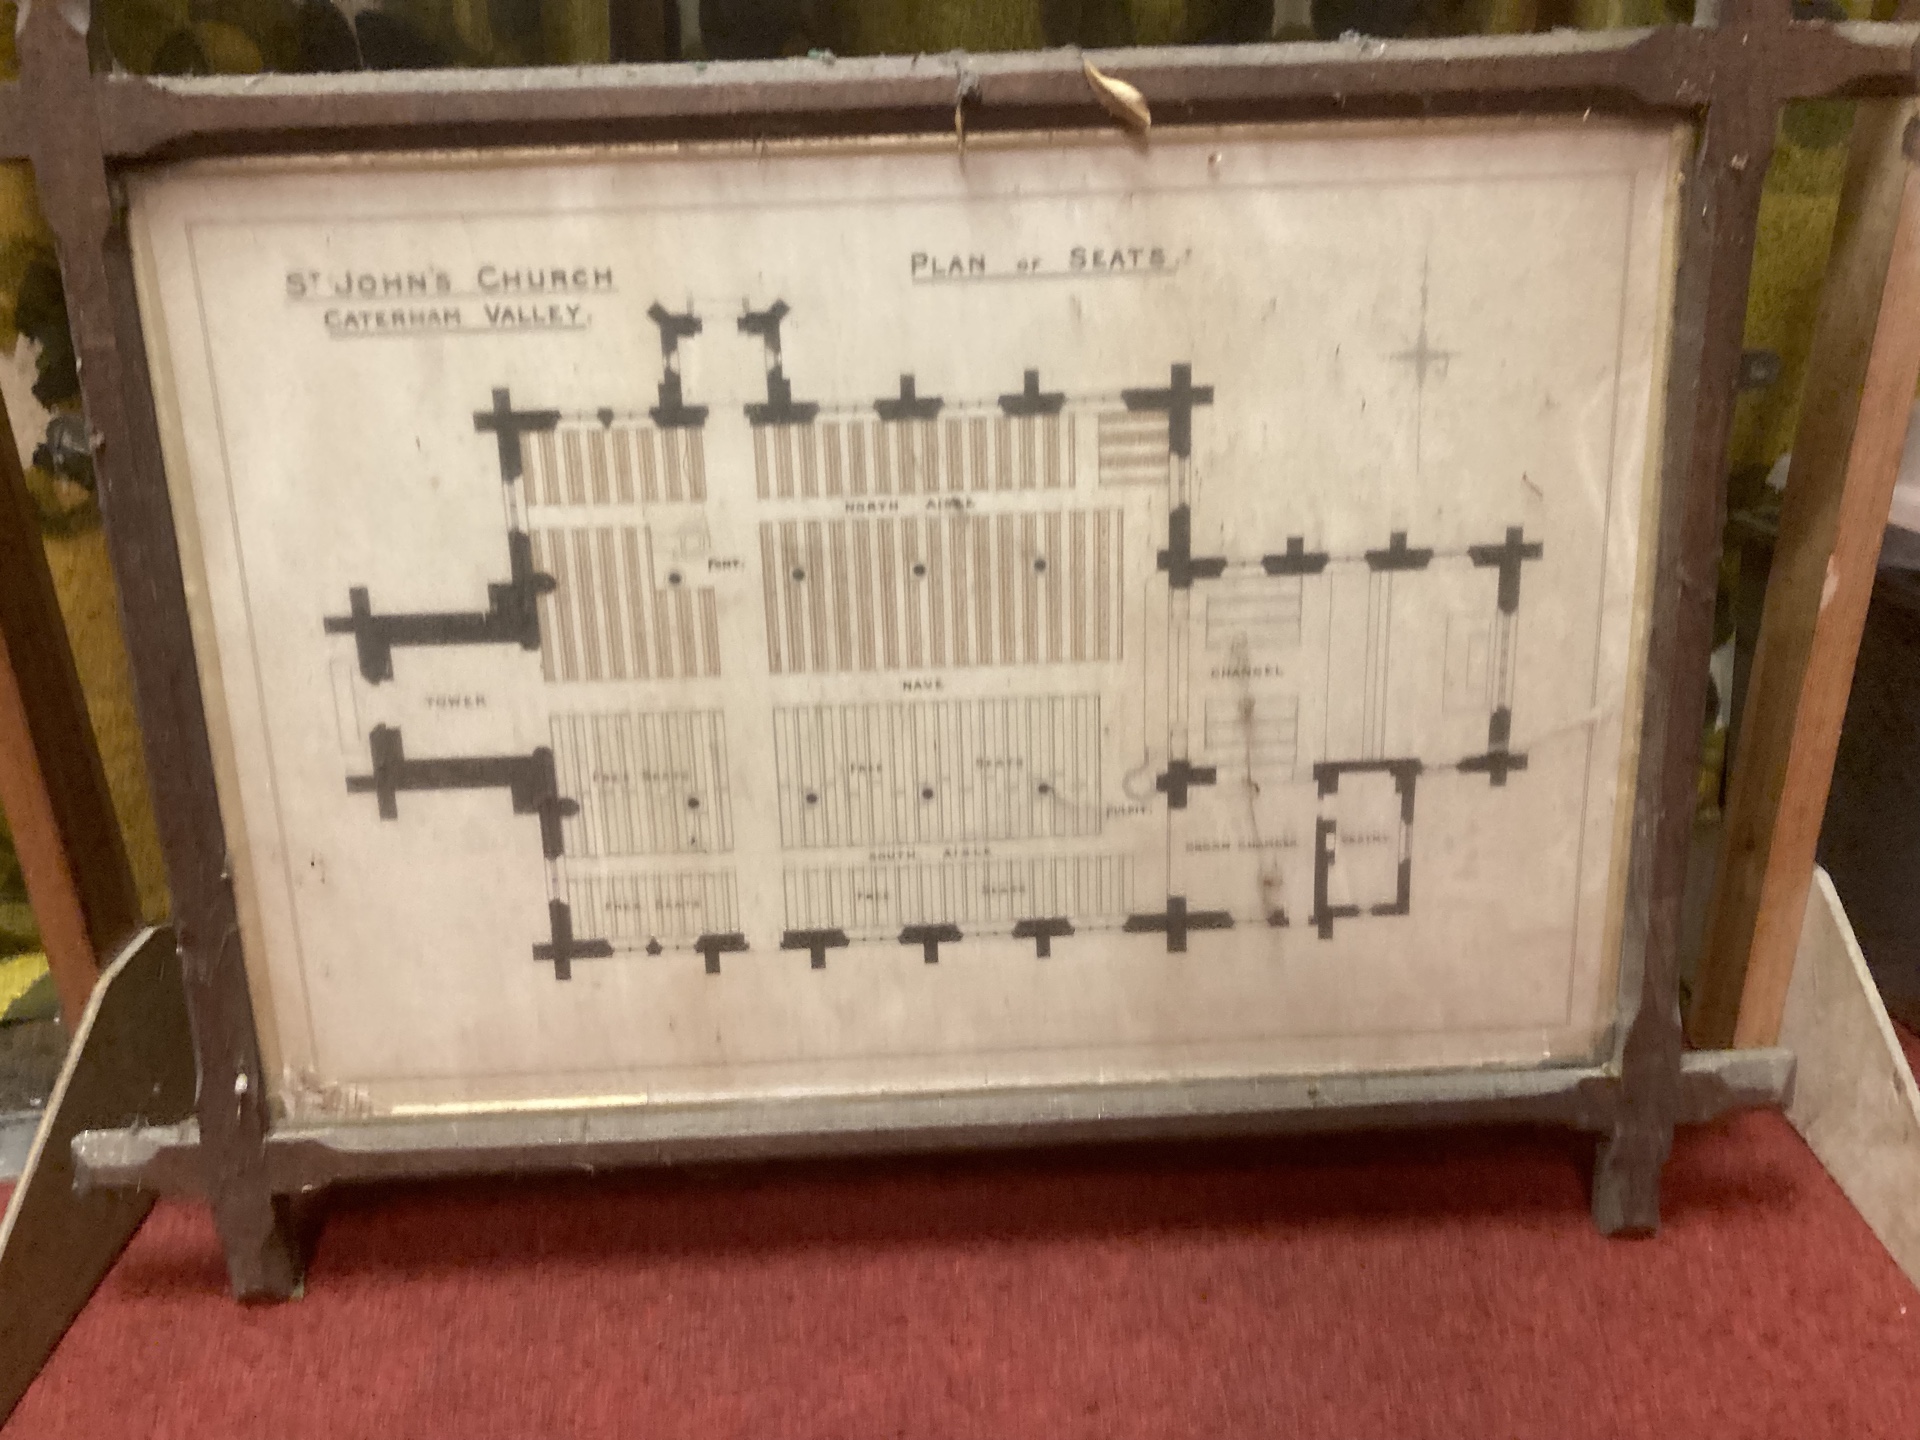 A framed seating plan for St John's, probably from before World War I.